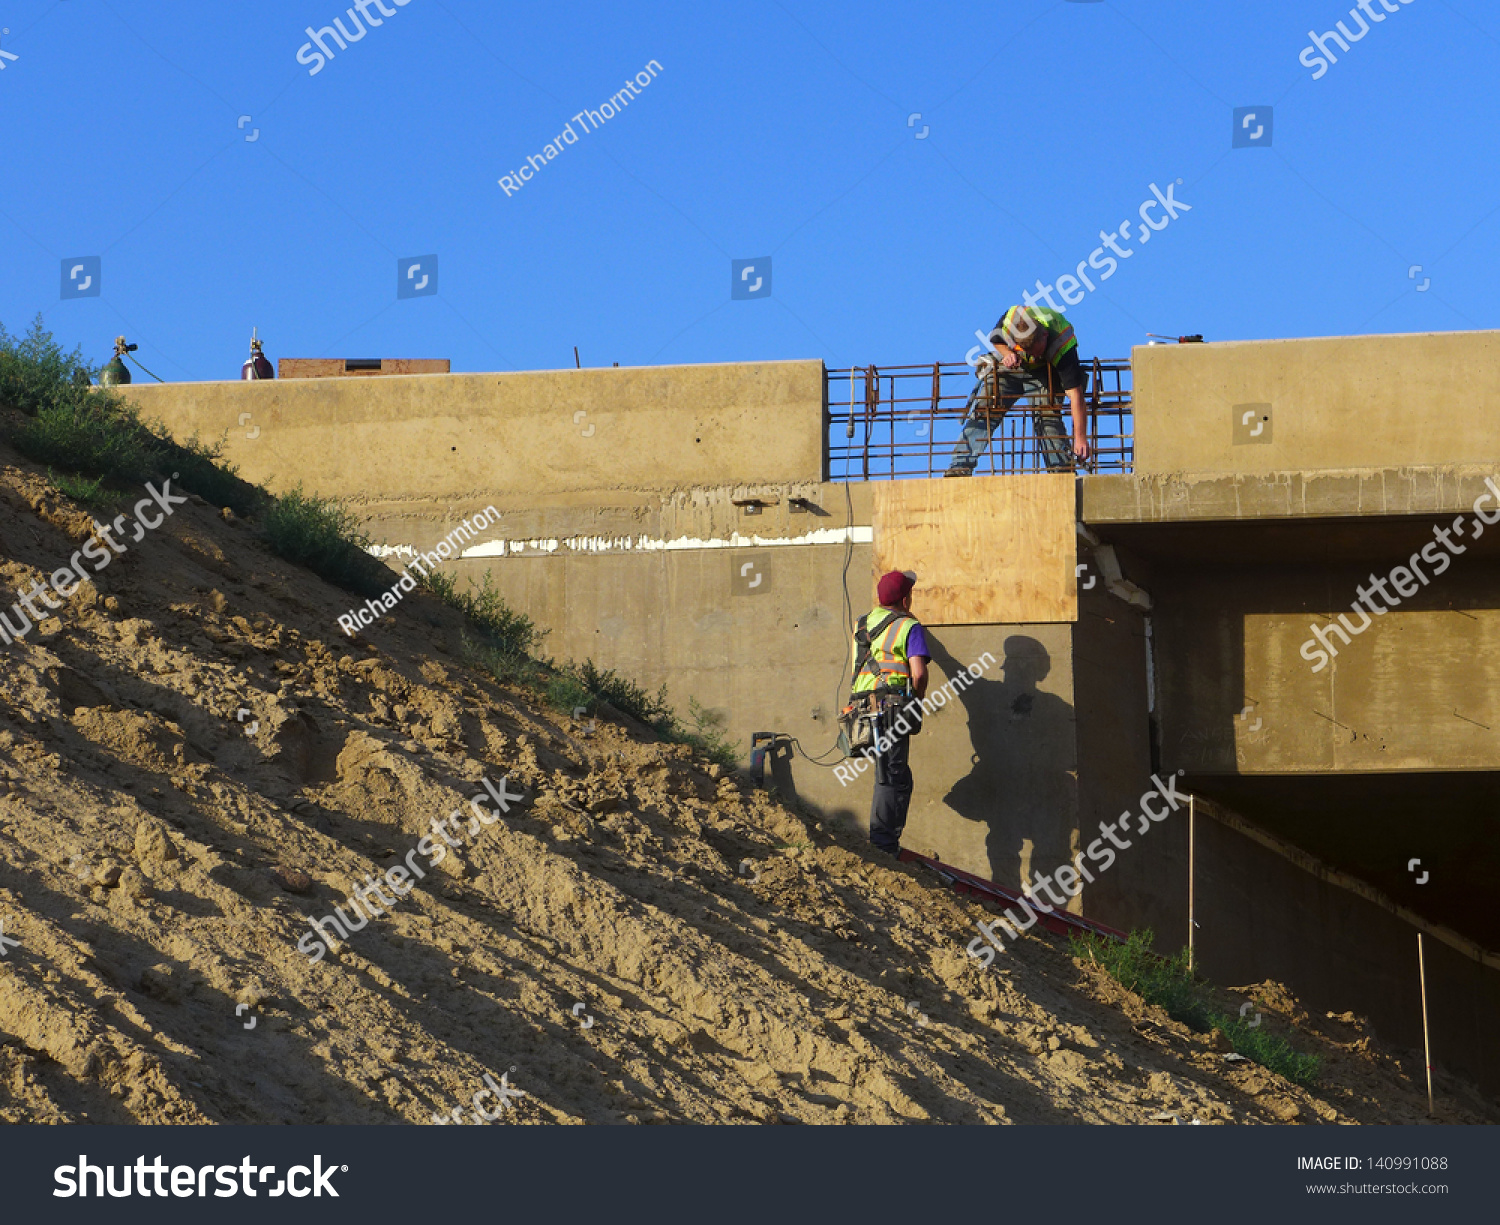 Construction workers in public